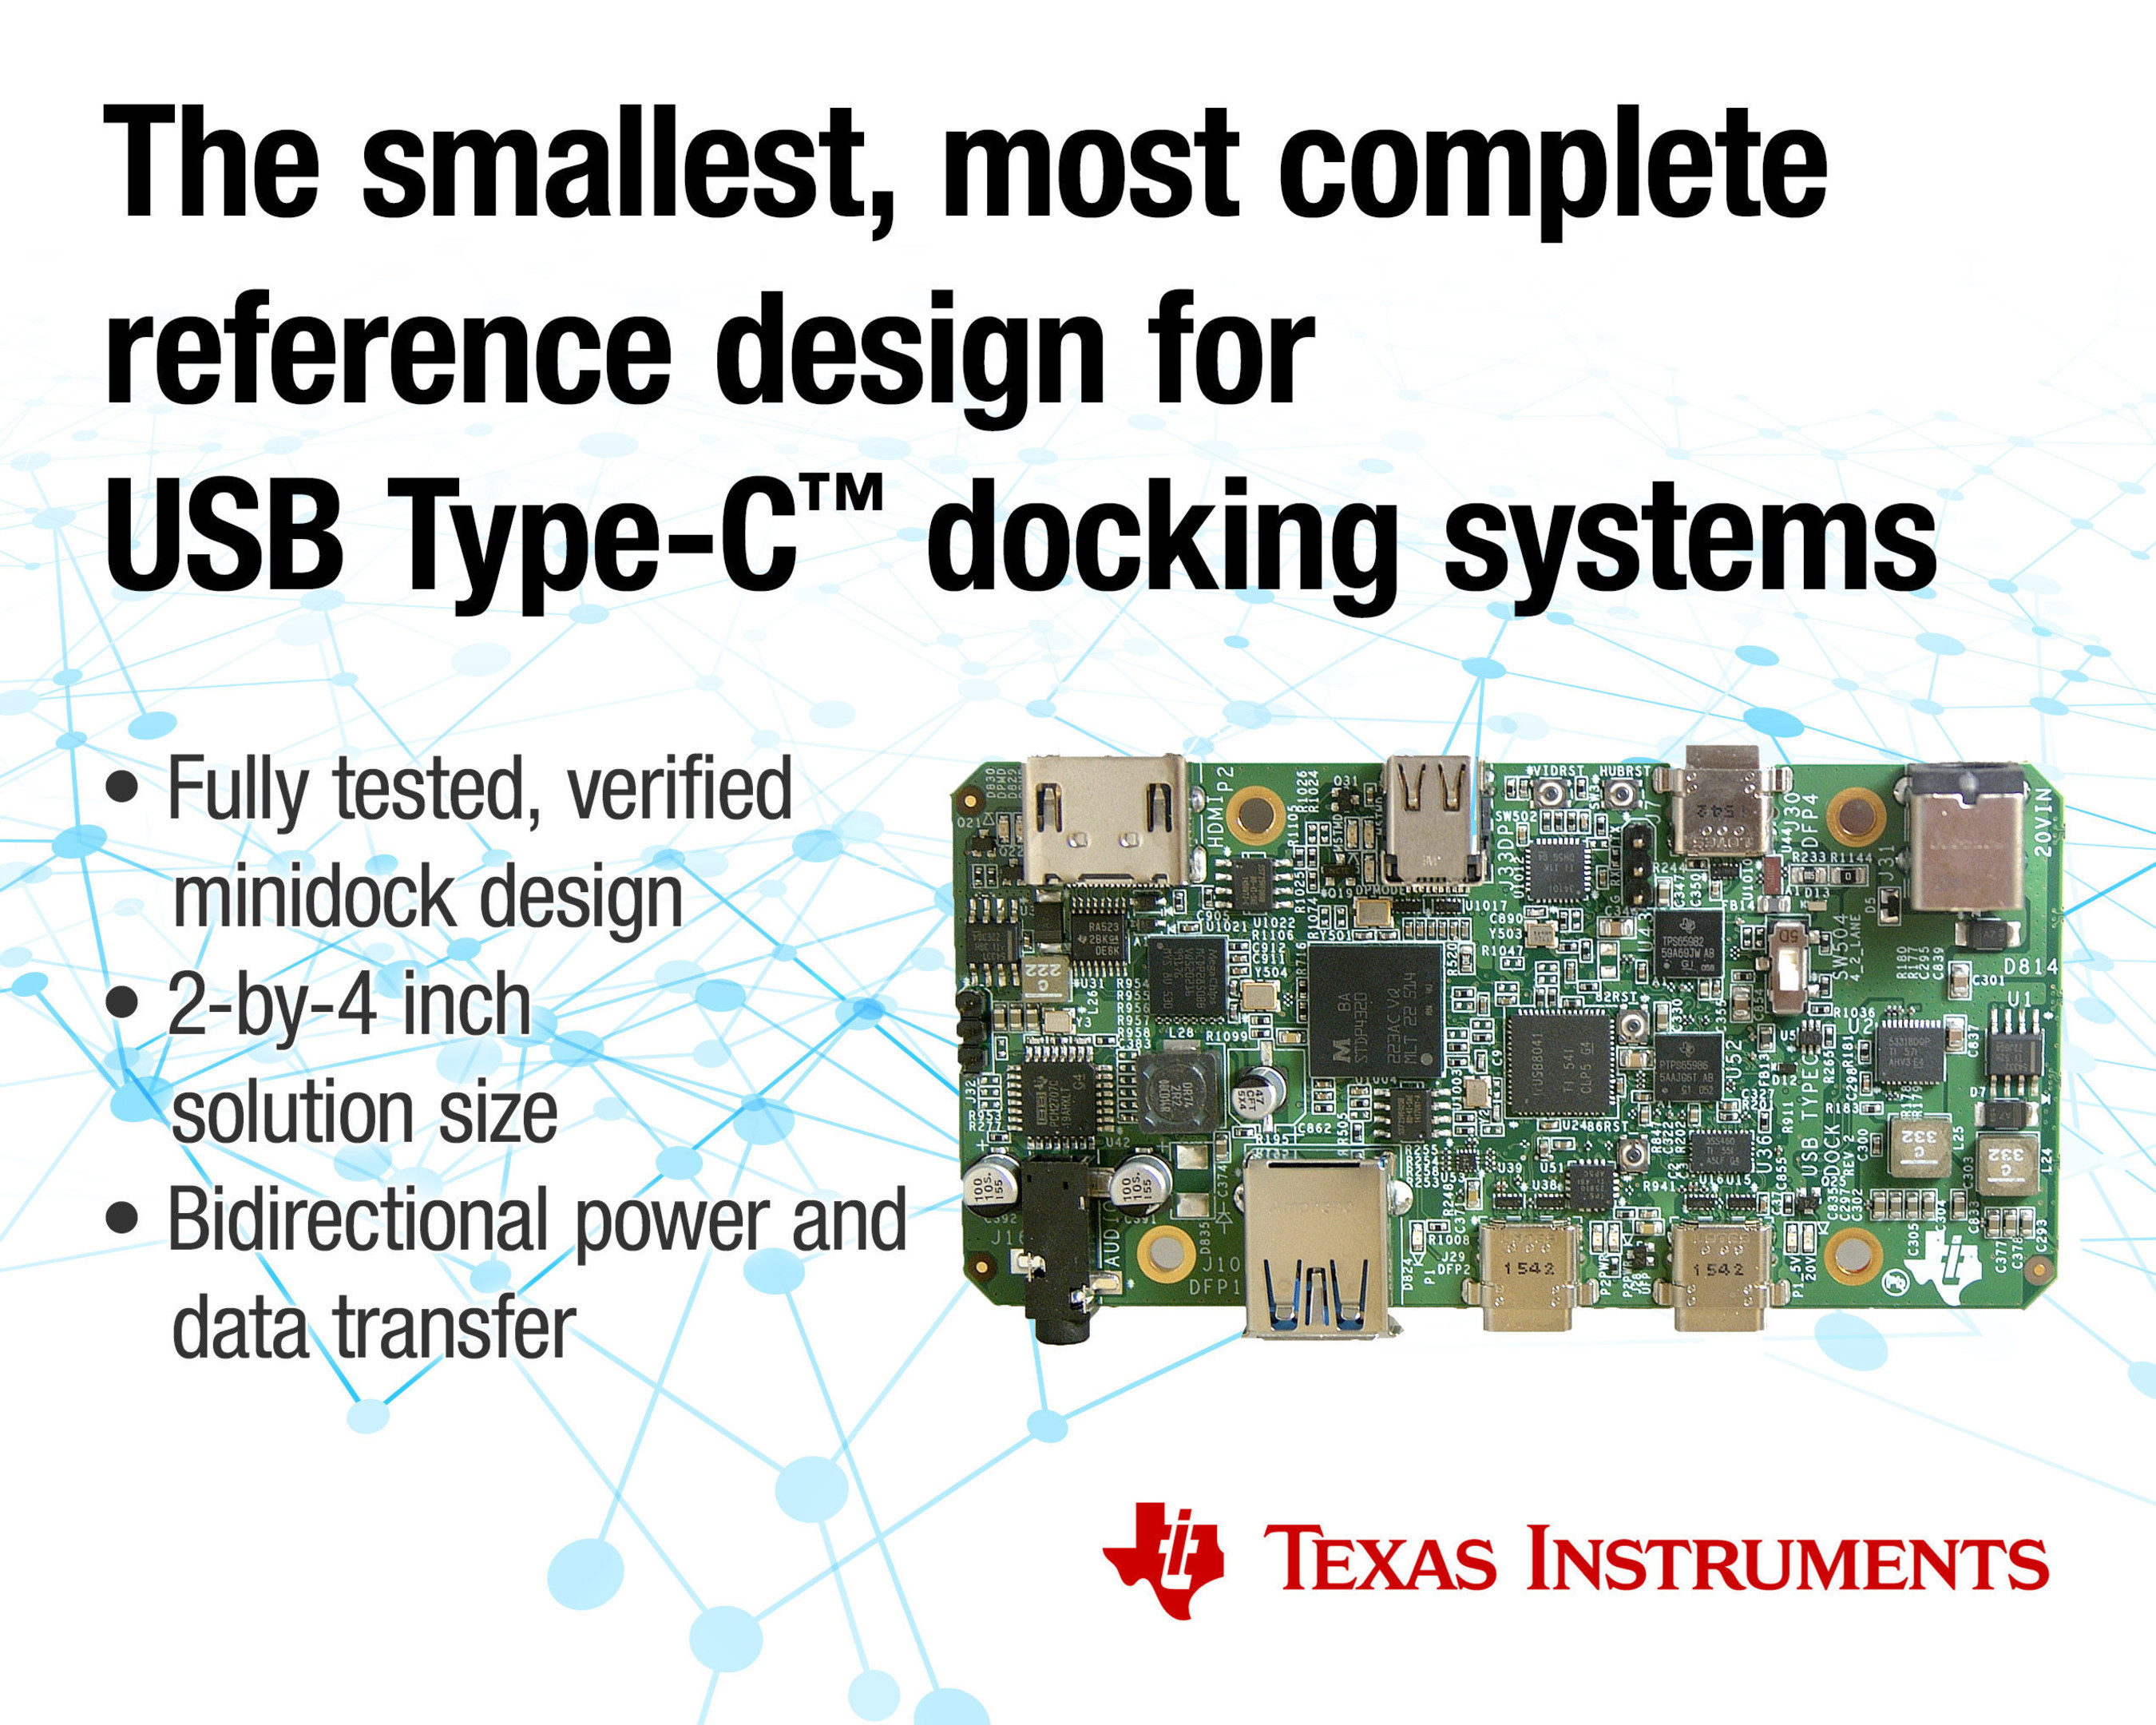 TI's multiport minidock reference design speeds development of USB Type-C and Power Delivery docking stations